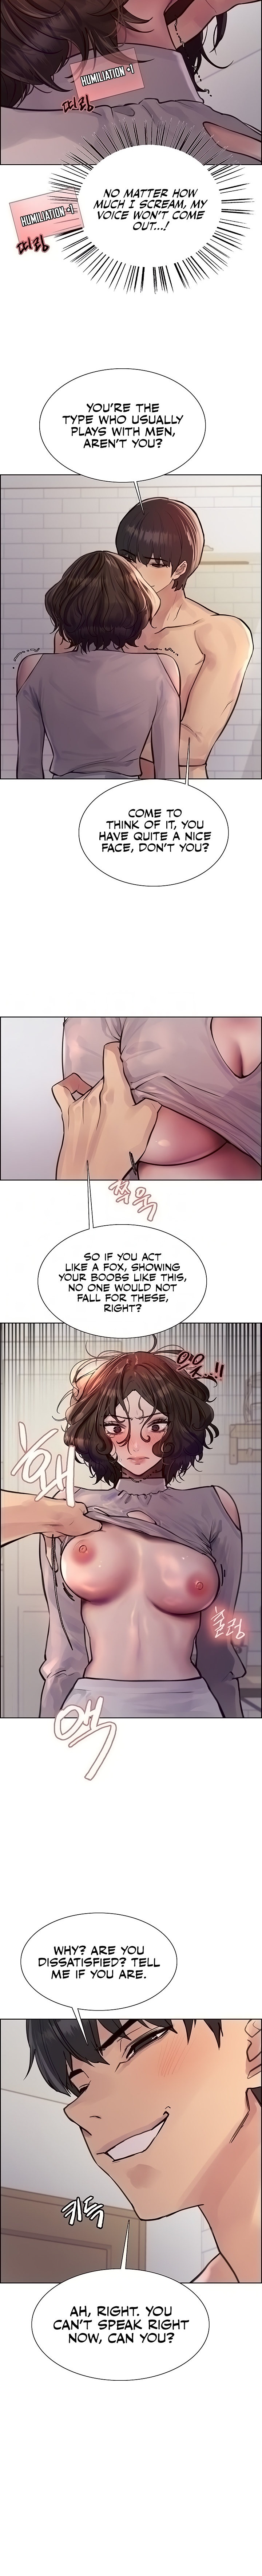 Sex Stopwatch - Chapter 59 Page 4